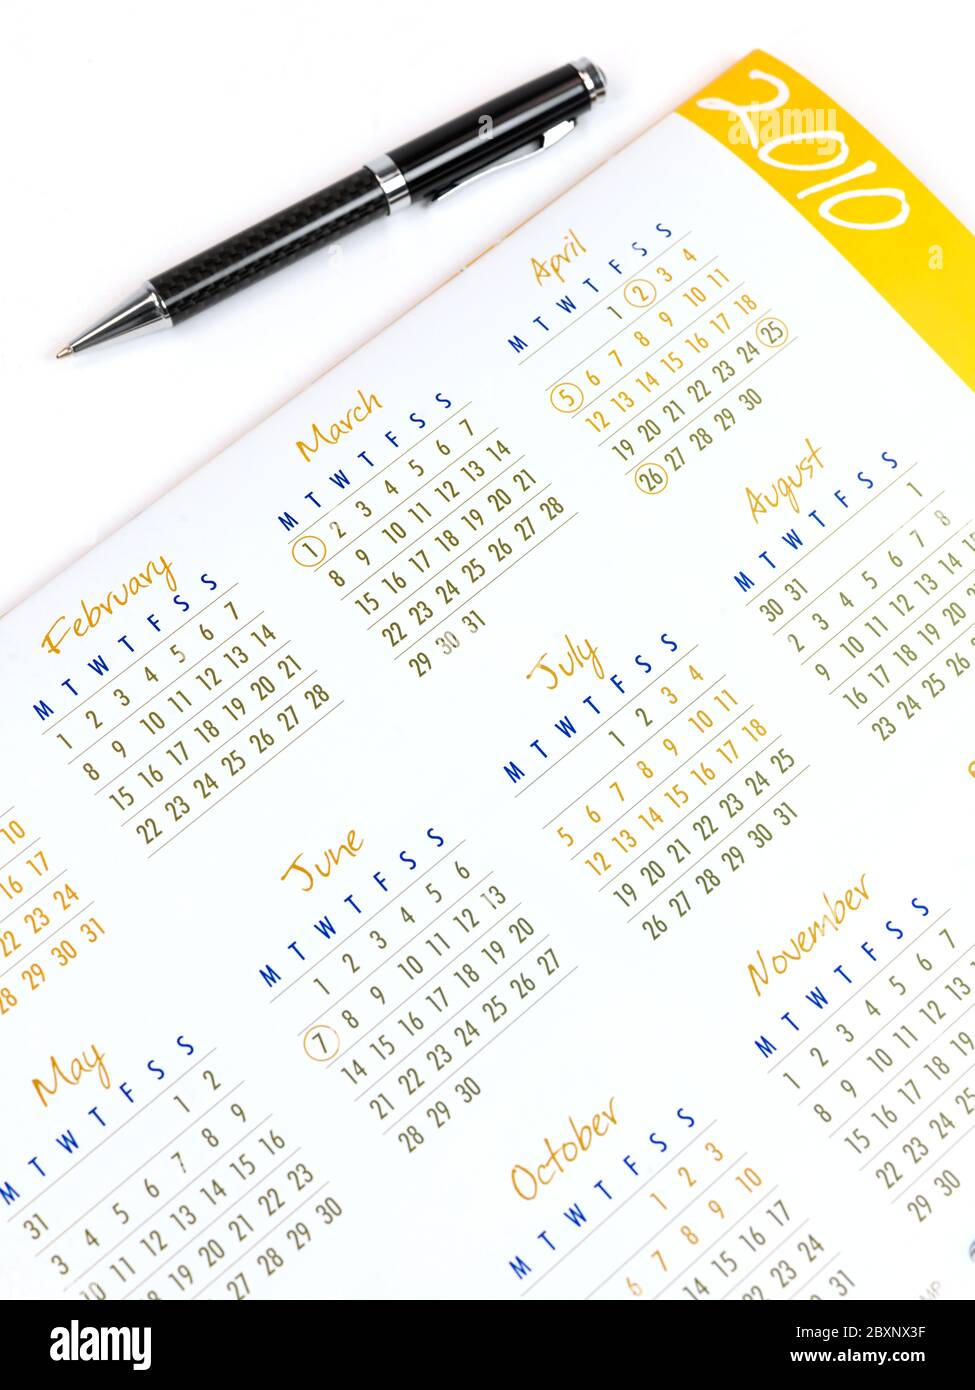 A 2010 Calendar isolated against a white background Stock Photo